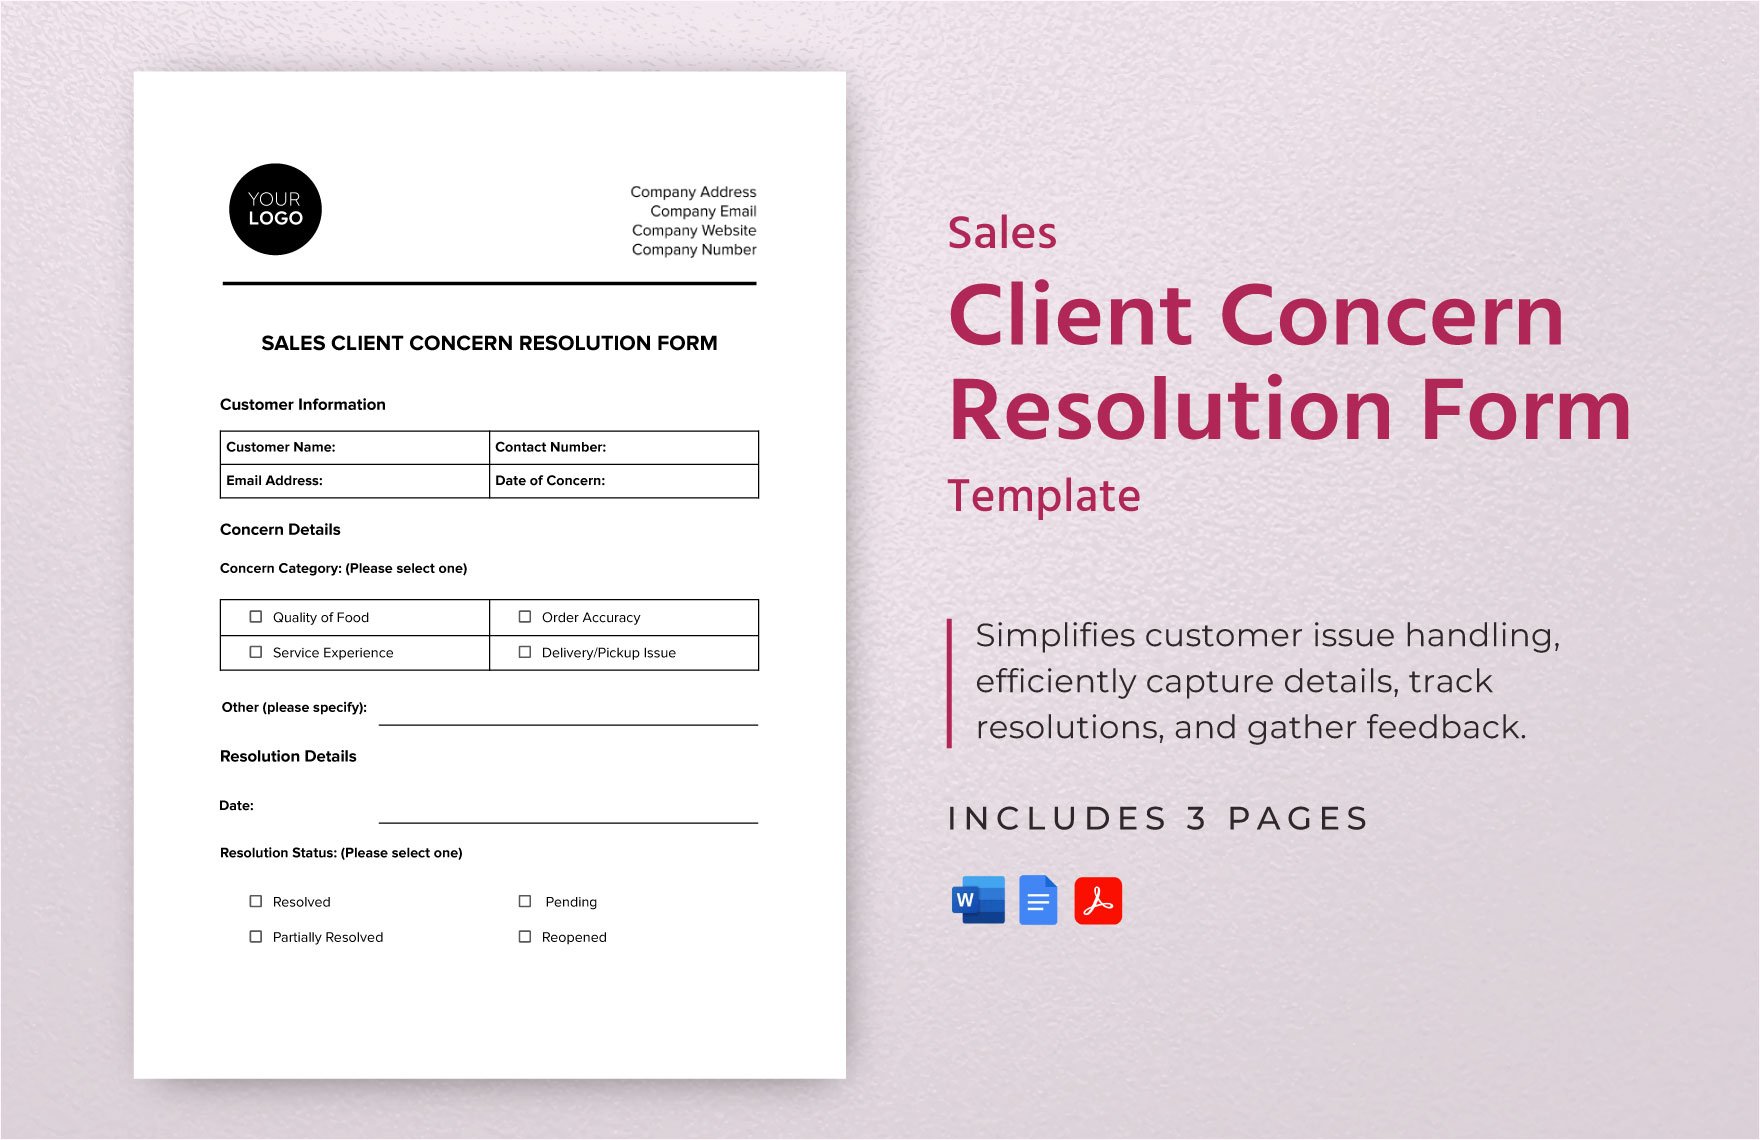 Sales Client Concern Resolution Form Template in Word, Google Docs, PDF